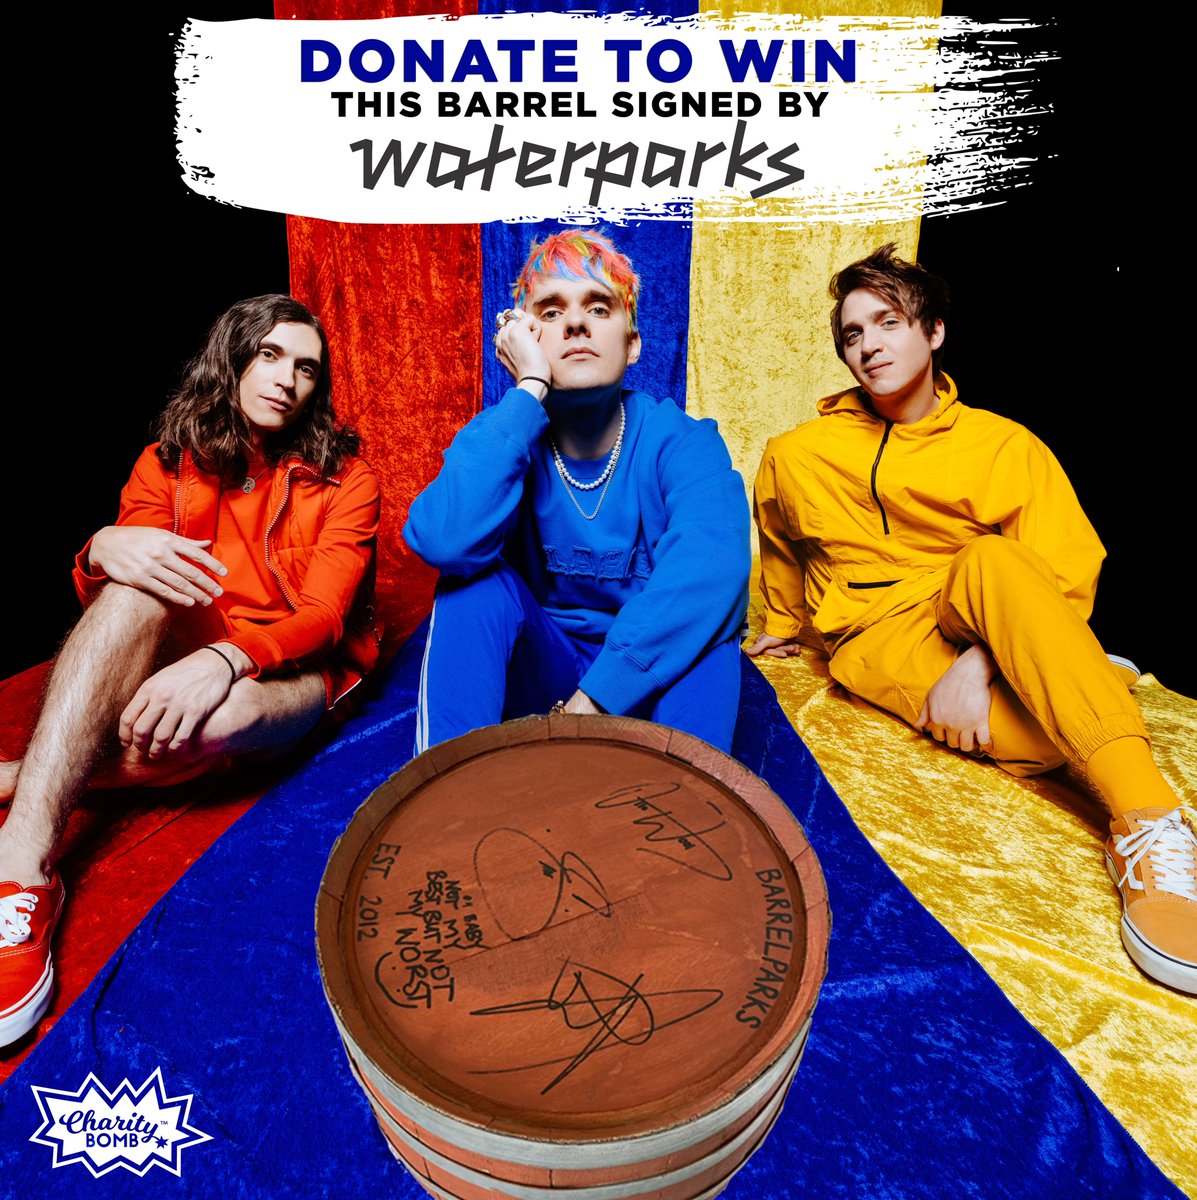 @waterparks DONATING OTTO DRUM BARREL FROM THE PARANOID VIDEO, ALL PROCEEDS GO TO SUICIDE PREVENTION, DOING IT RAFFLE STYLE INSTEAD OF BIDDING SO NO ONE GONNA BE BROKE AFTER, THANK U 🔴

ENTER: bit.ly/WaterparksRaff…